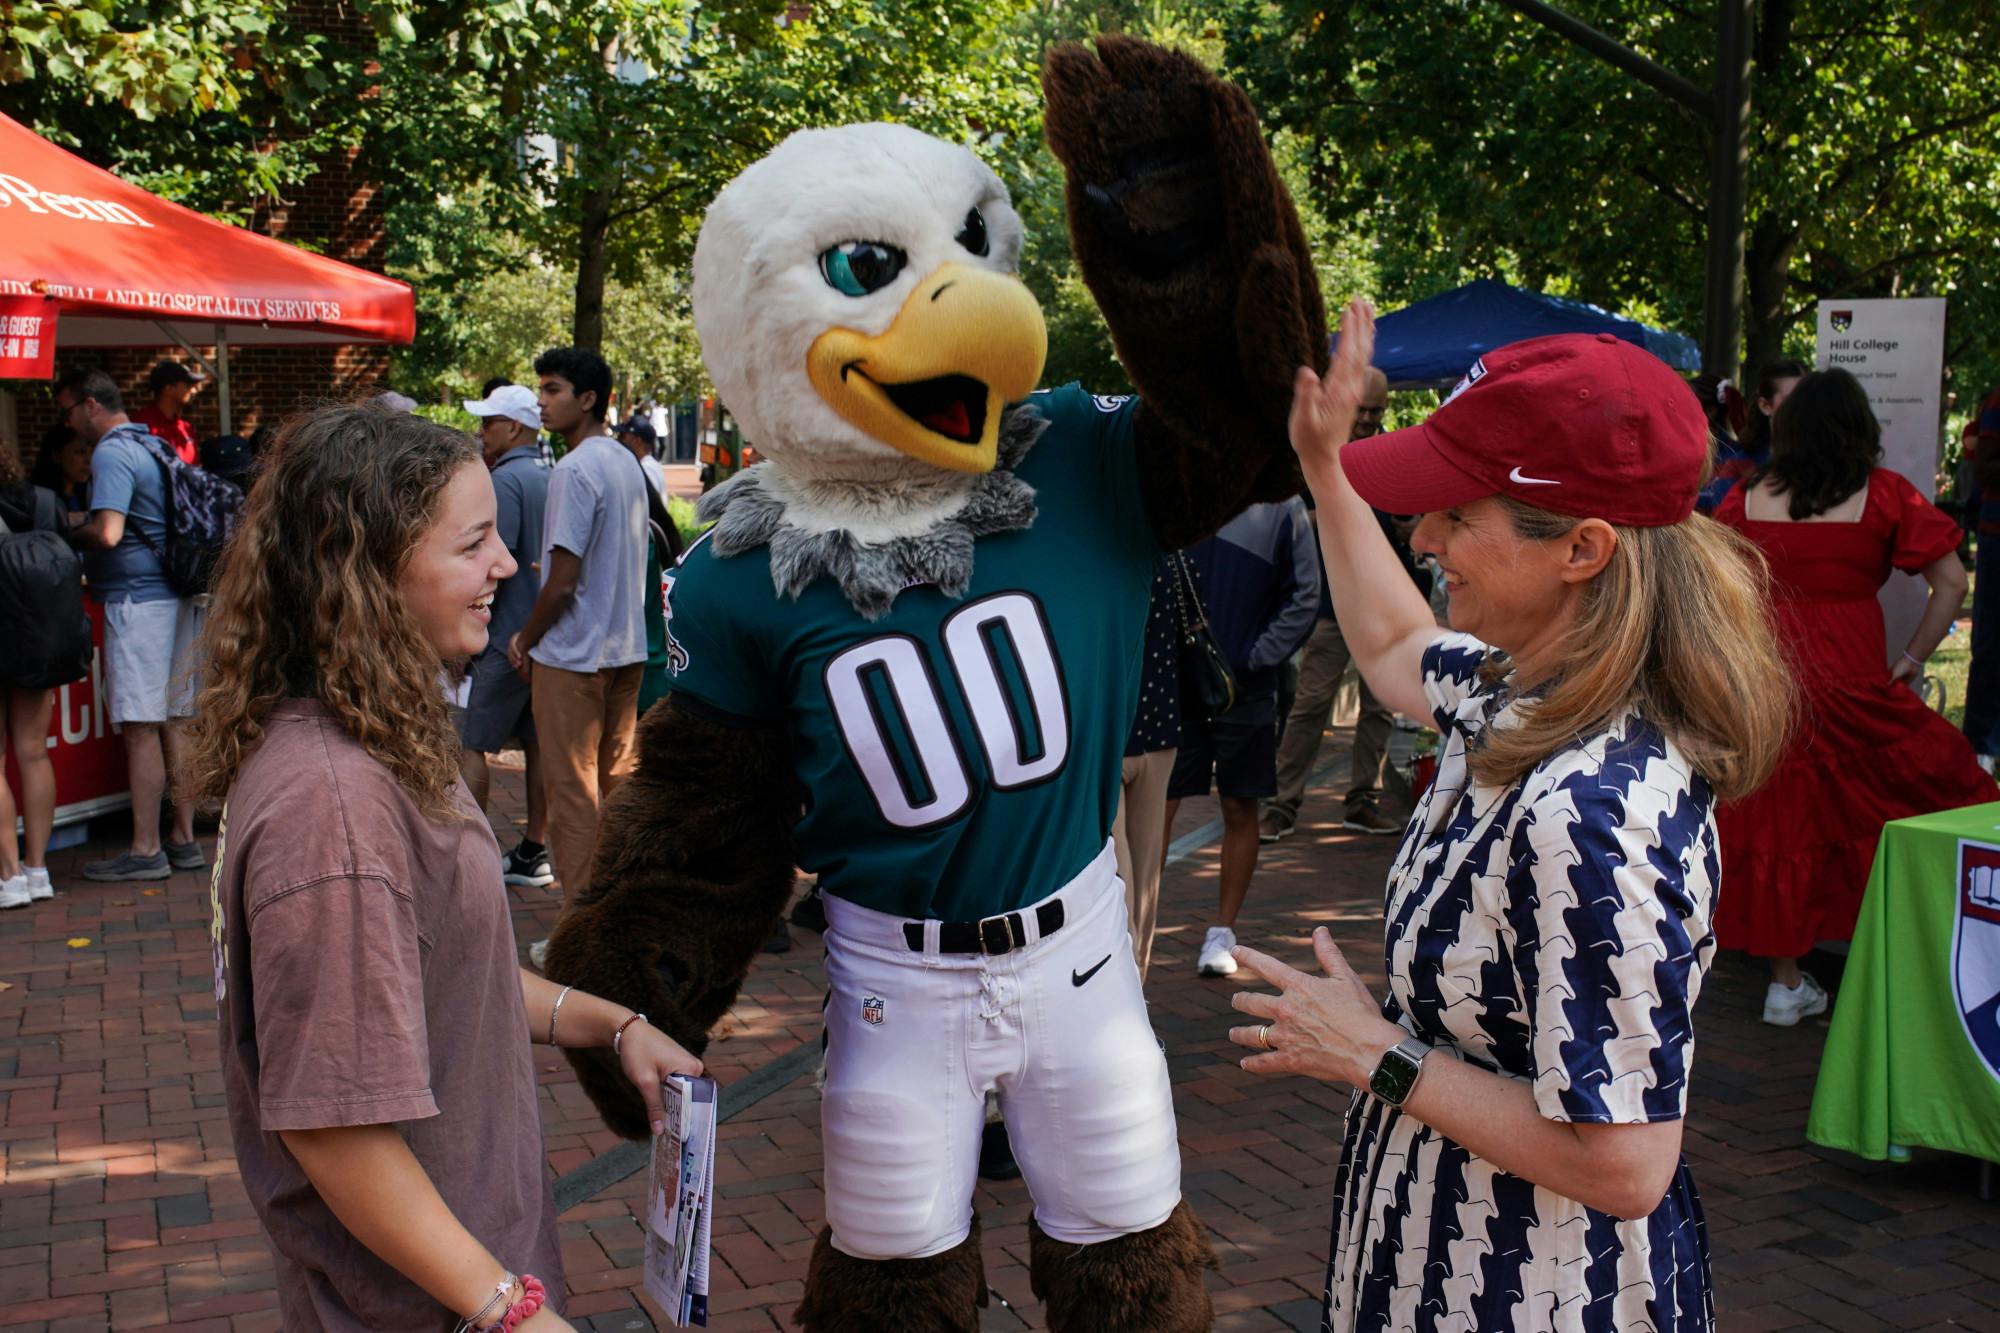 In Photos: Penn community welcomes Class of 2027, transfer